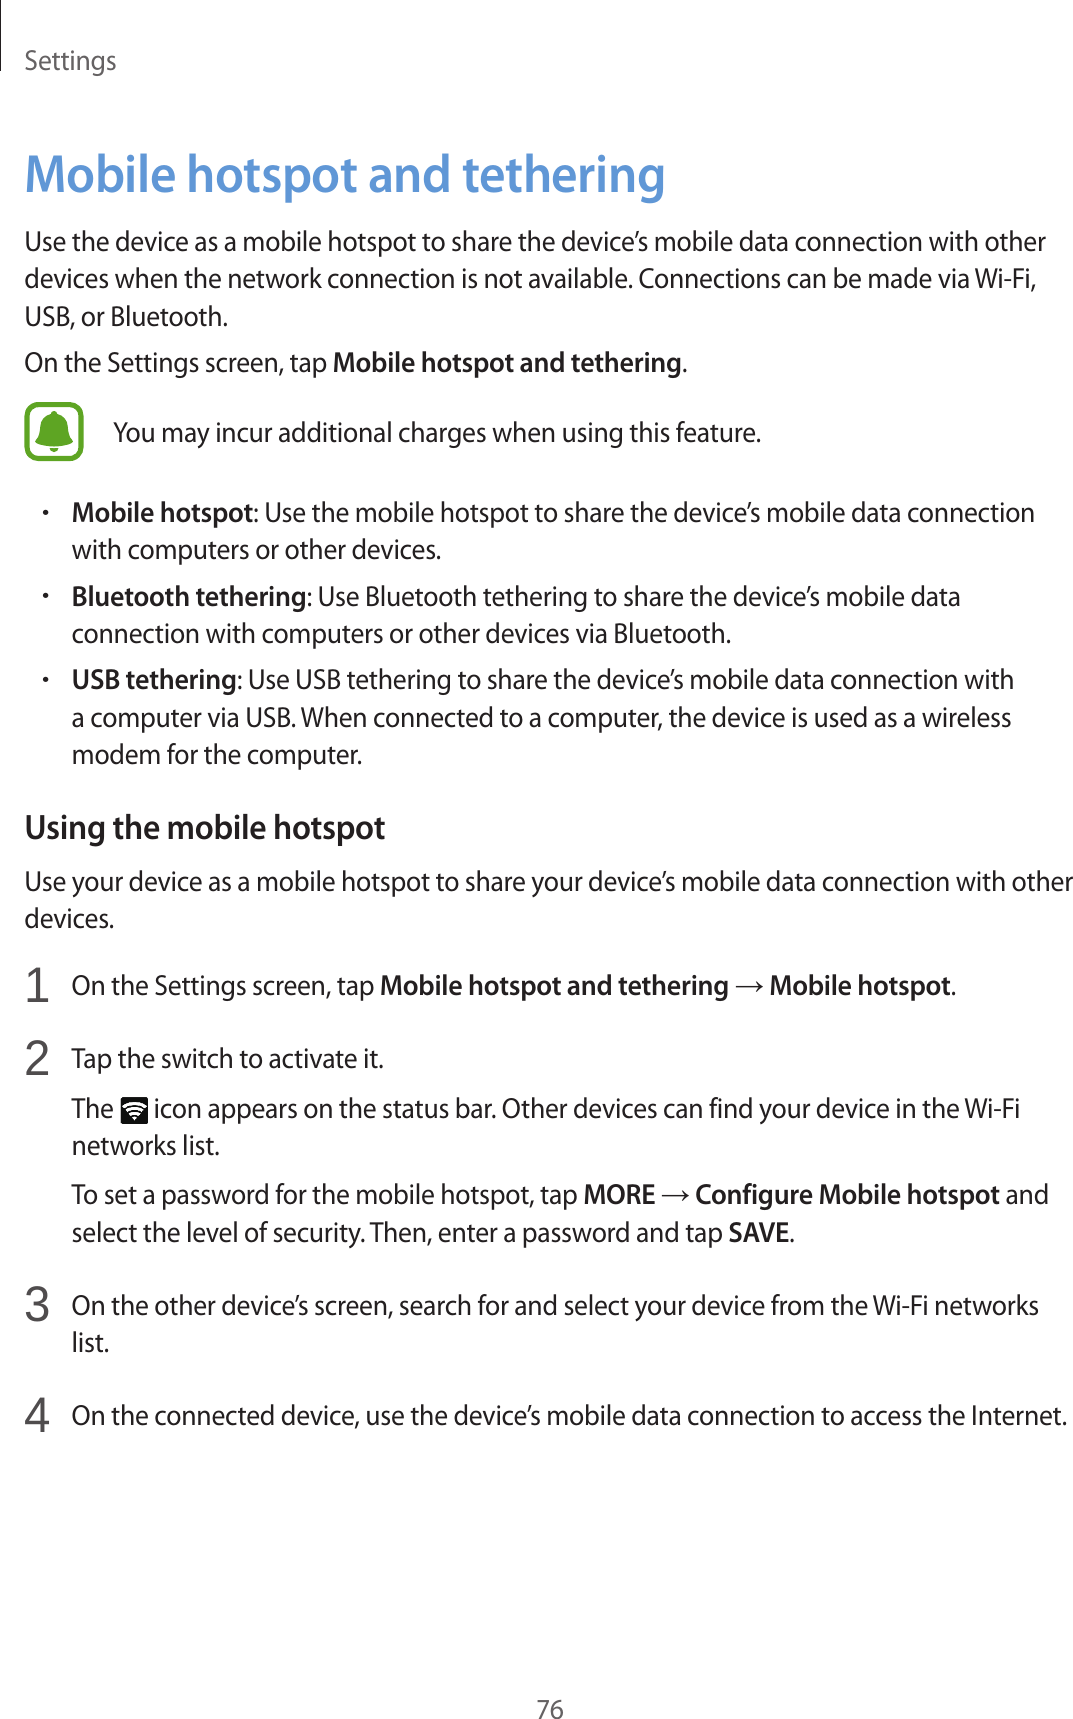 Settings76Mobile hotspot and tetheringUse the device as a mobile hotspot to share the device’s mobile data connection with other devices when the network connection is not available. Connections can be made via Wi-Fi, USB, or Bluetooth.On the Settings screen, tap Mobile hotspot and tethering.You may incur additional charges when using this feature.•Mobile hotspot: Use the mobile hotspot to share the device’s mobile data connection with computers or other devices.•Bluetooth tethering: Use Bluetooth tethering to share the device’s mobile data connection with computers or other devices via Bluetooth.•USB tethering: Use USB tethering to share the device’s mobile data connection with a computer via USB. When connected to a computer, the device is used as a wireless modem for the computer.Using the mobile hotspotUse your device as a mobile hotspot to share your device’s mobile data connection with other devices.1  On the Settings screen, tap Mobile hotspot and tethering → Mobile hotspot.2  Tap the switch to activate it.The   icon appears on the status bar. Other devices can find your device in the Wi-Fi networks list.To set a password for the mobile hotspot, tap MORE → Configure Mobile hotspot and select the level of security. Then, enter a password and tap SAVE.3  On the other device’s screen, search for and select your device from the Wi-Fi networks list.4  On the connected device, use the device’s mobile data connection to access the Internet.